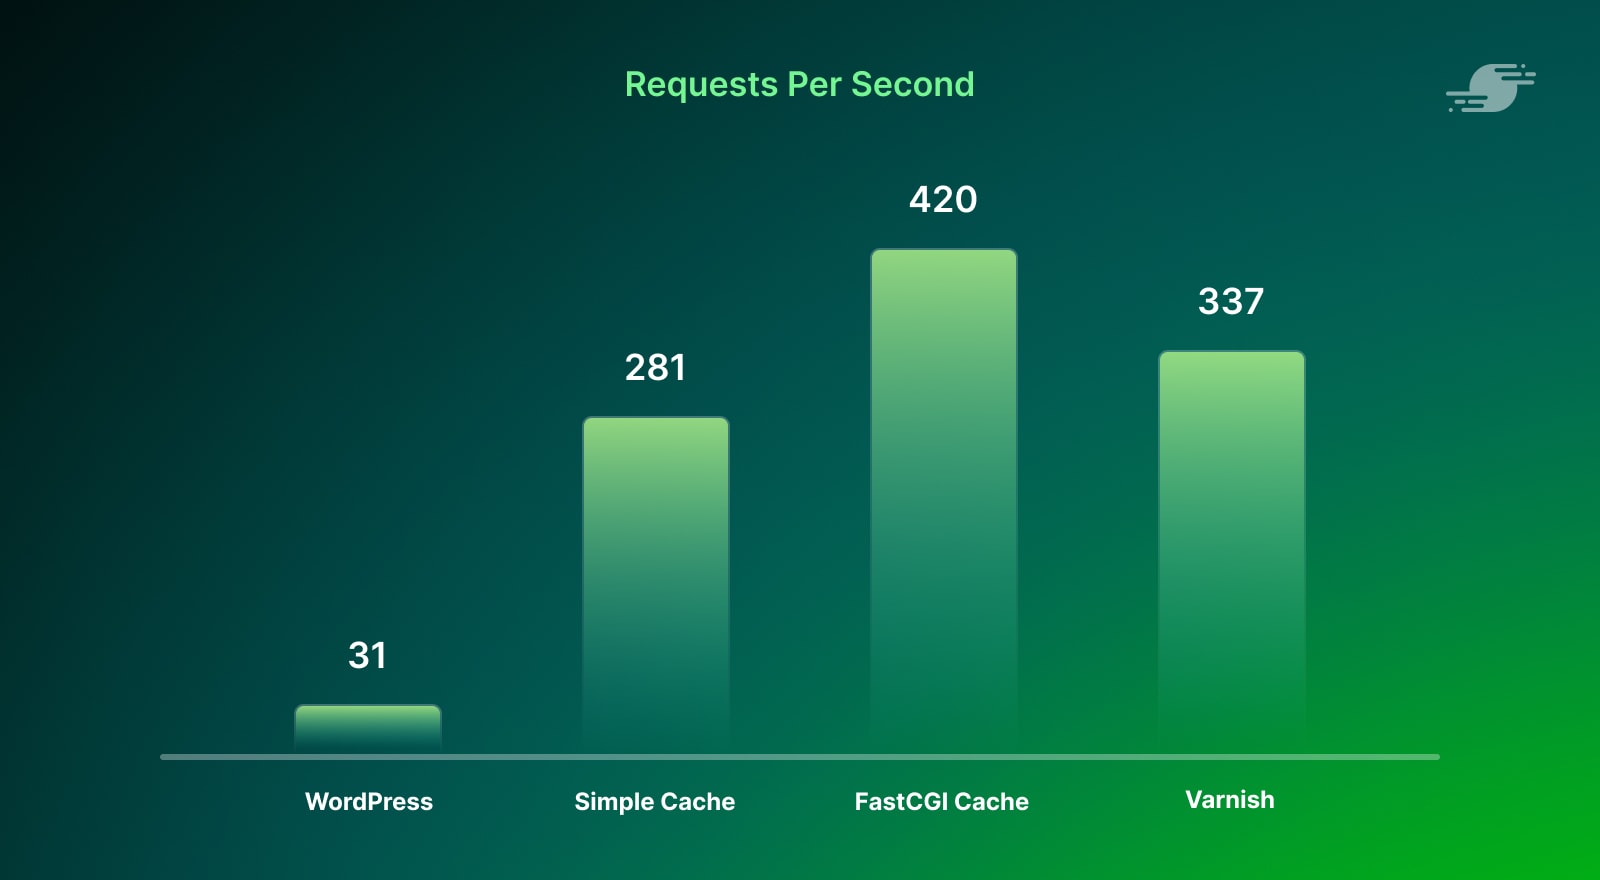 Nginx FastCGI caching requests per second